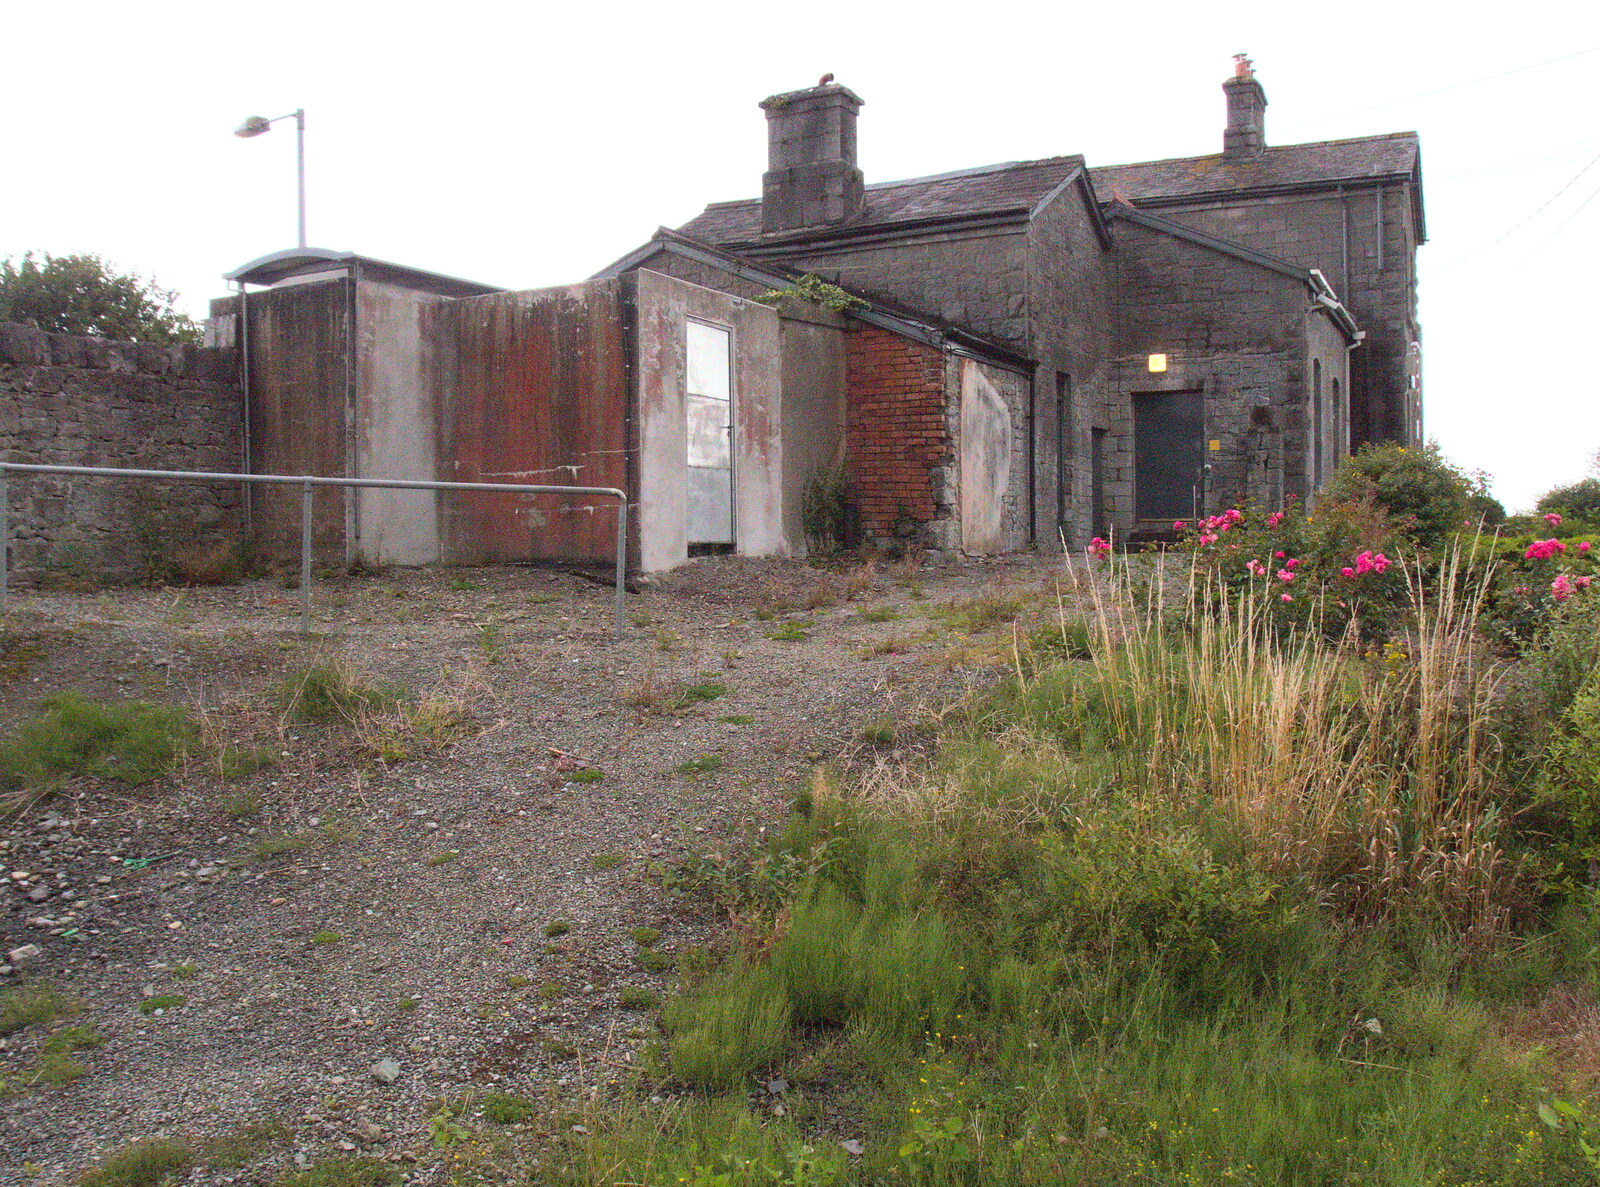 Farranfore station manages to look derelict from Liverpool to Baile an Sceilg, County Kerry, Ireland - 30th July 2017